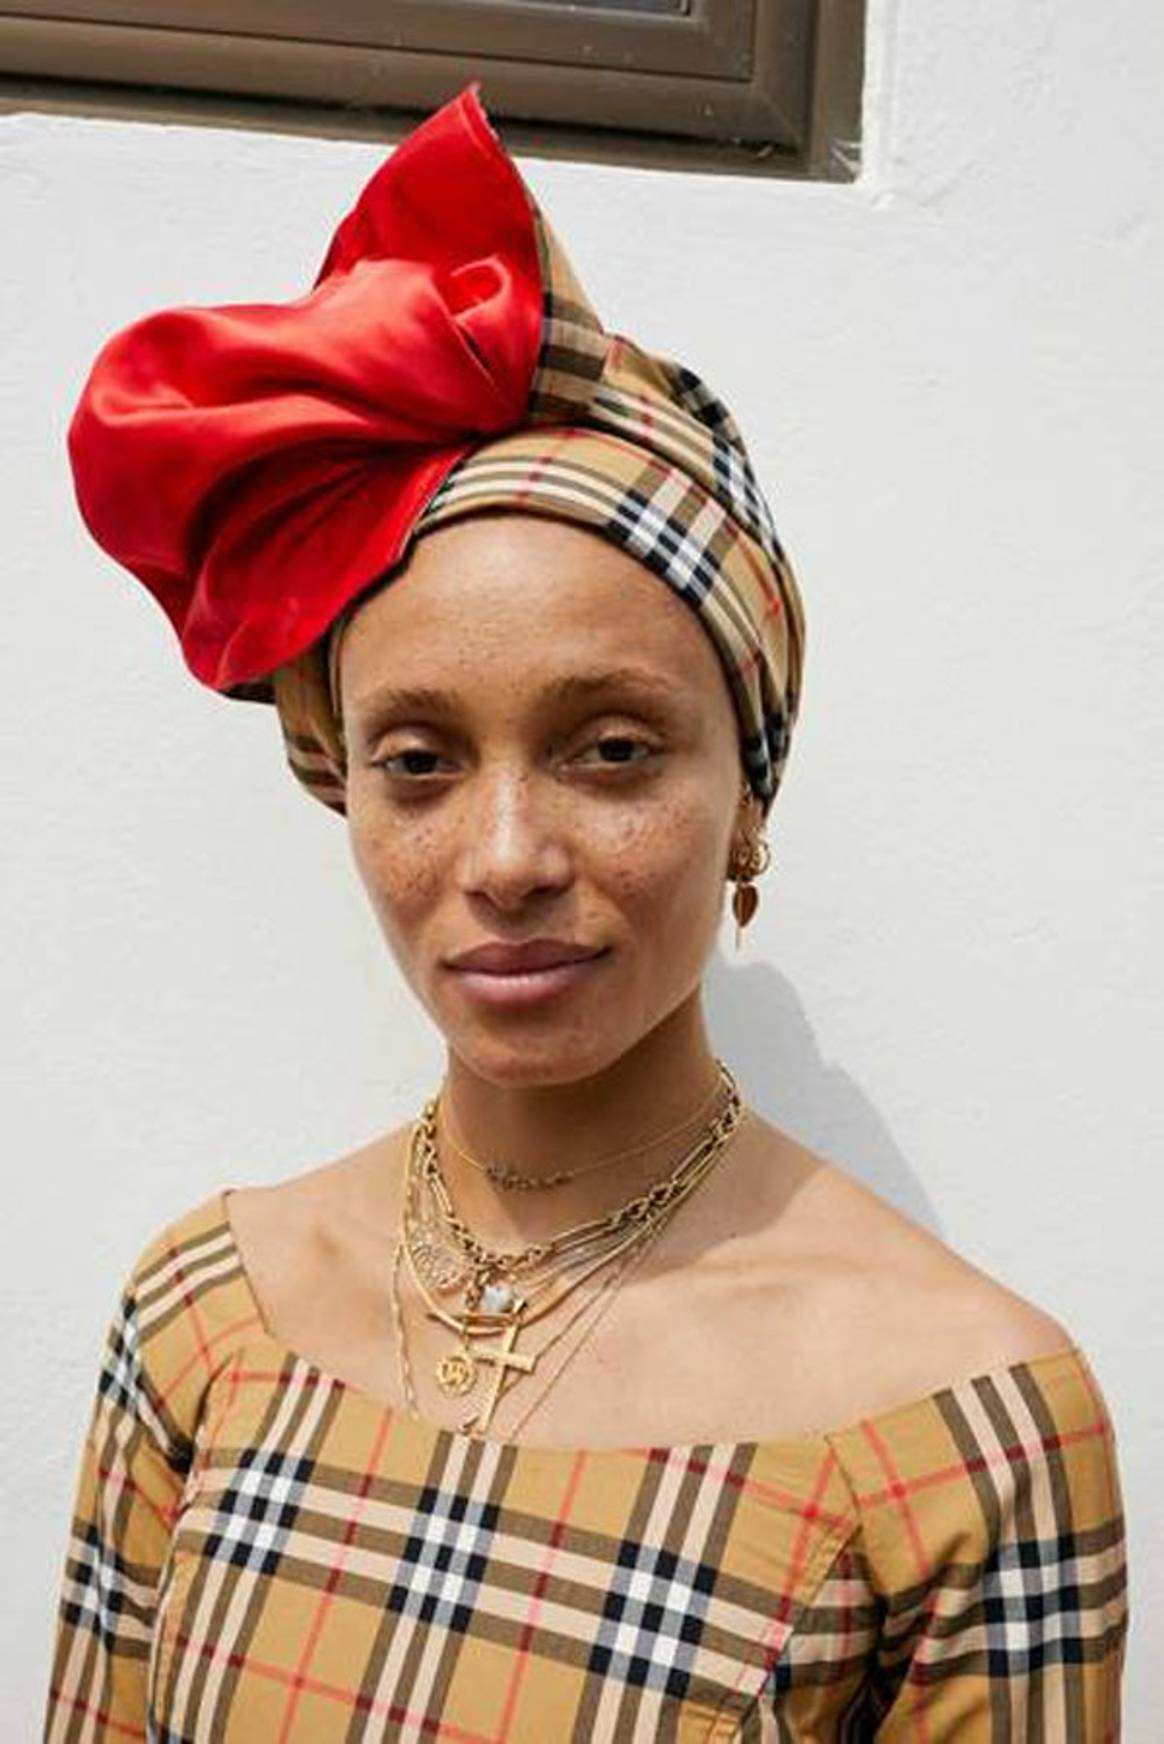 Adwoa Aboah brings Ghanian heritage to new Burberry campaign